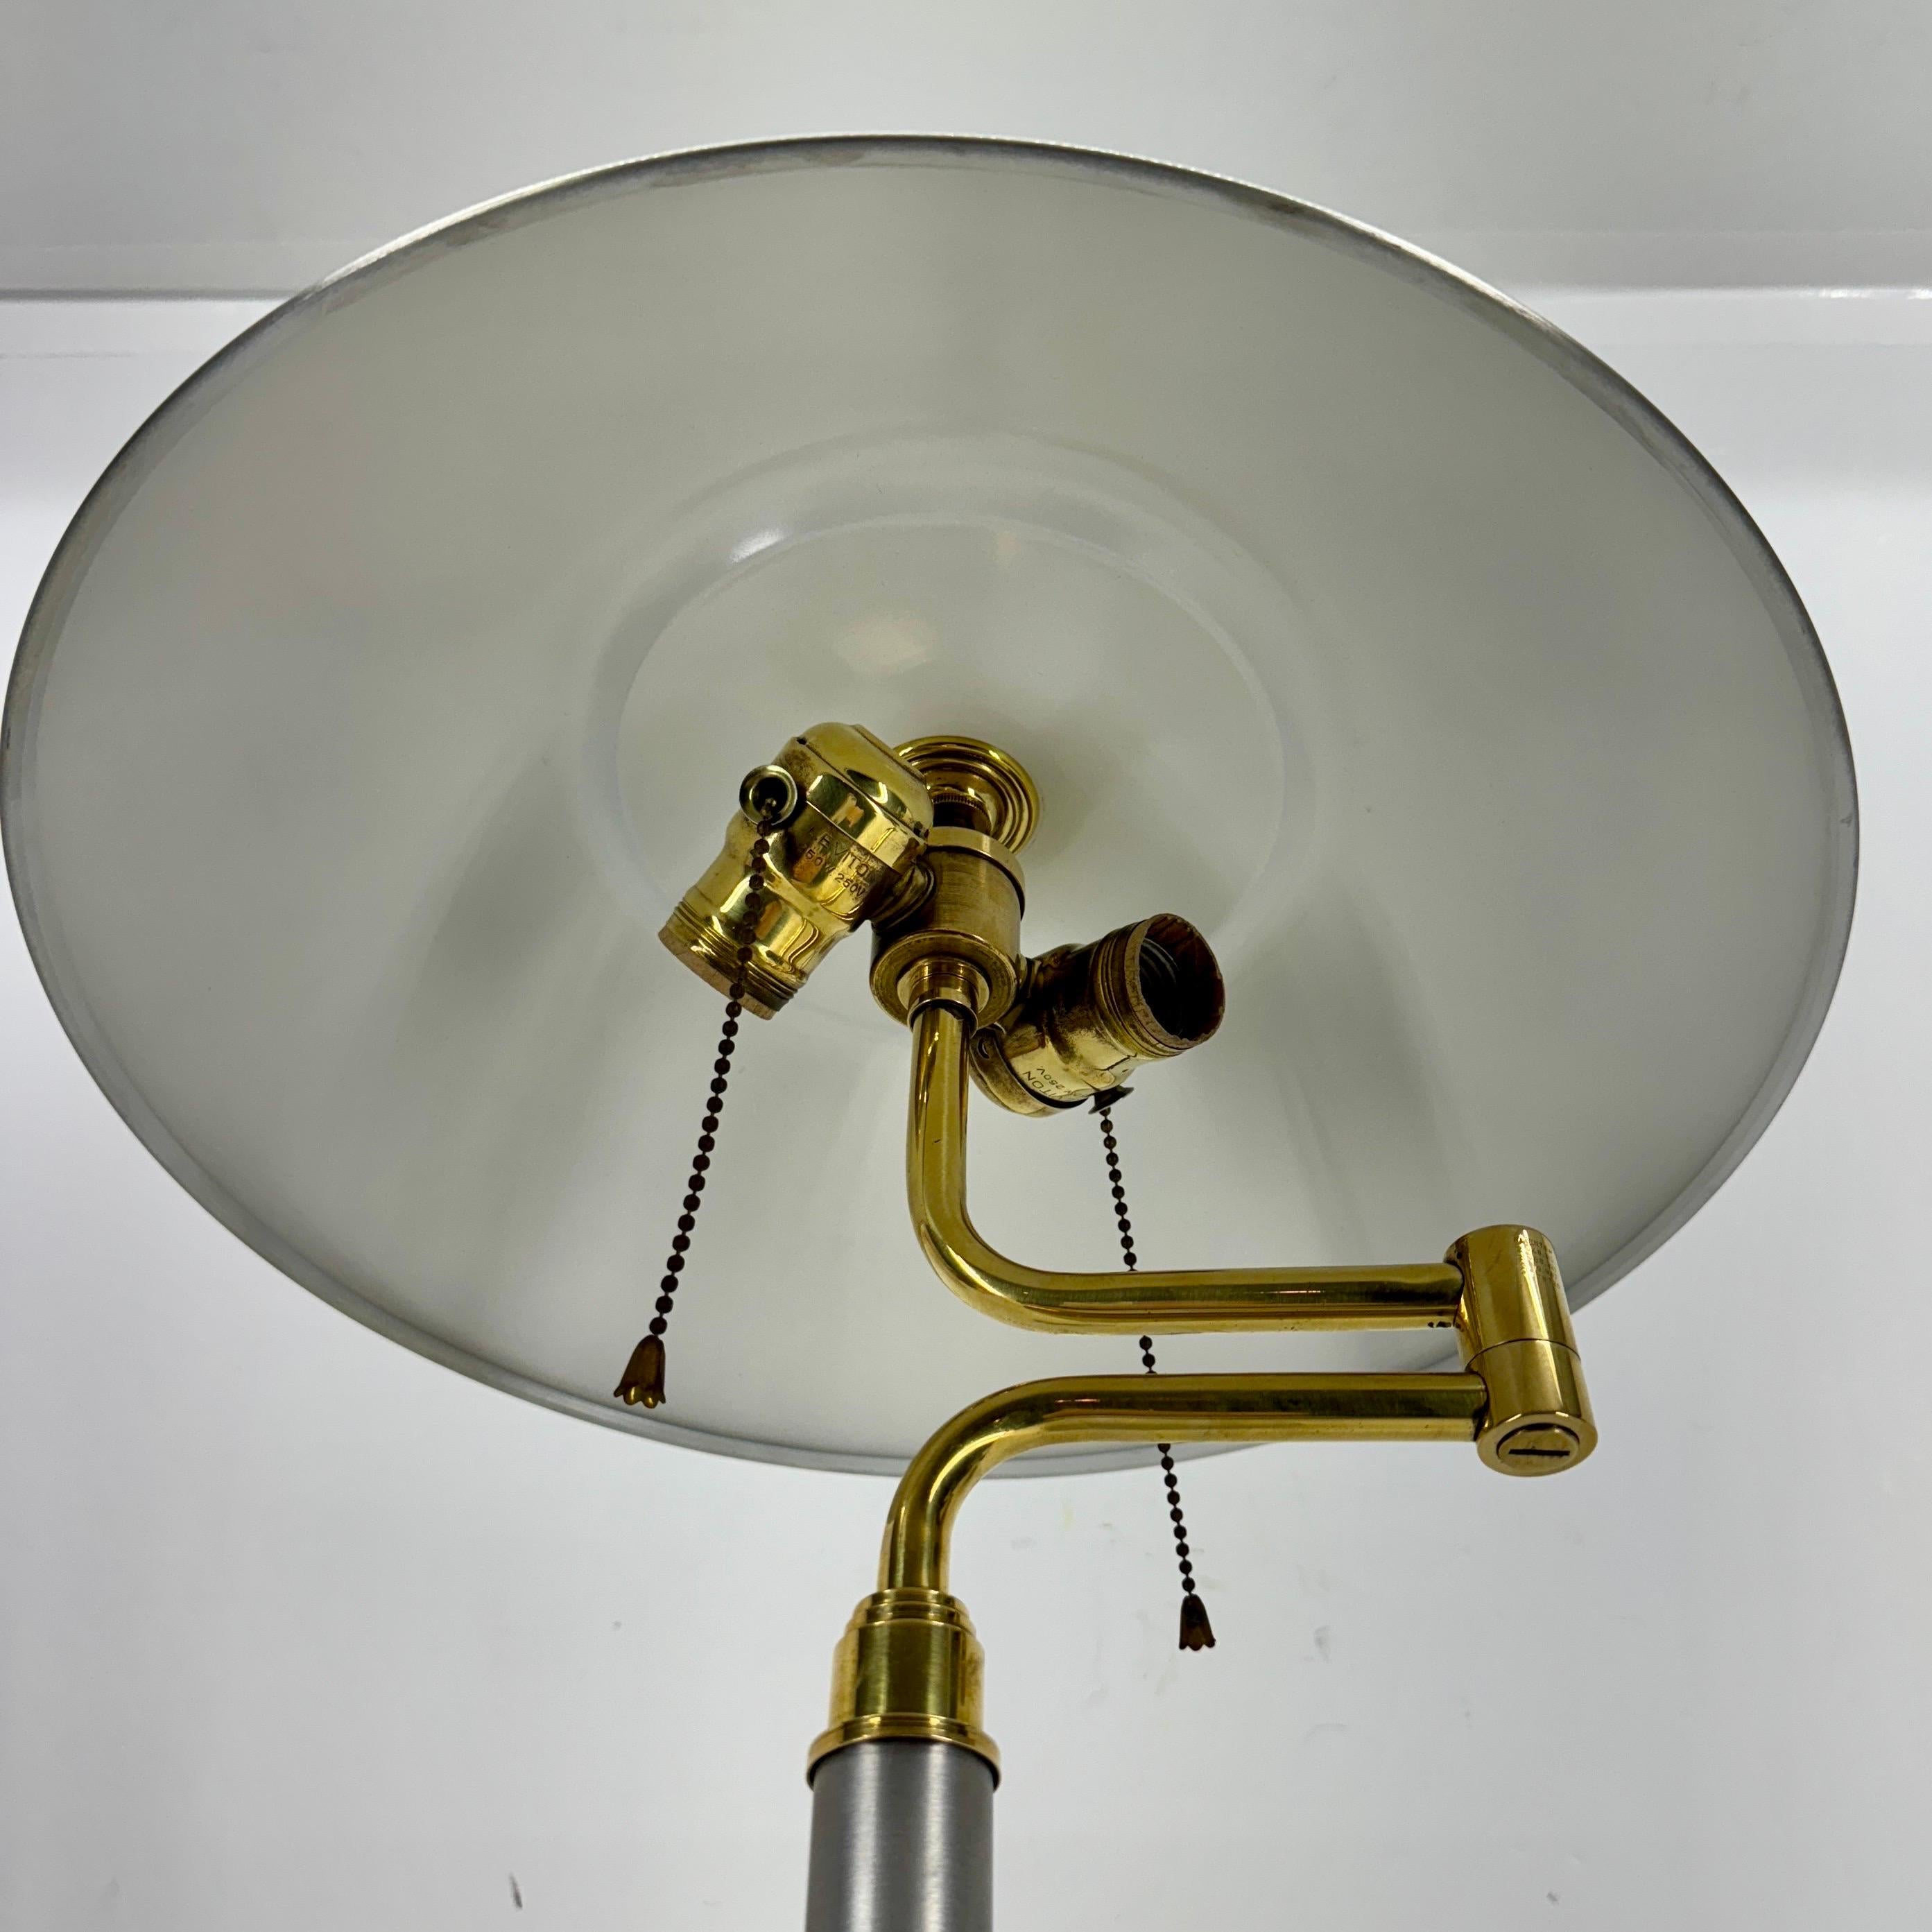 American Vintage Mid-Century Modern Desk Lamp in Aluminum and Brass  For Sale 6